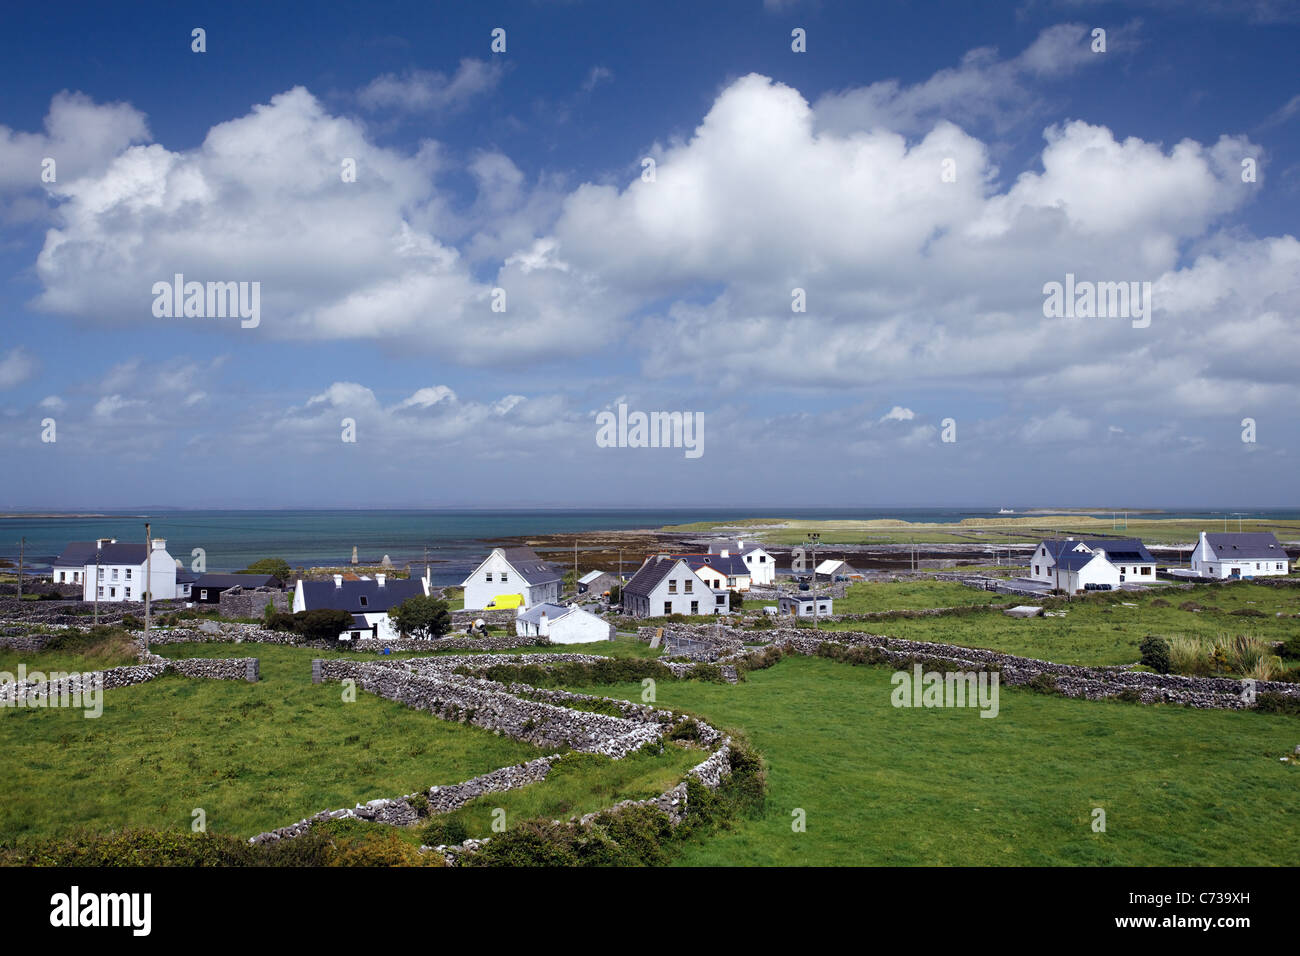 The village of Killeany on the island of Inishmore, Aran Islands, County Galway, Republic of Ireland Stock Photo